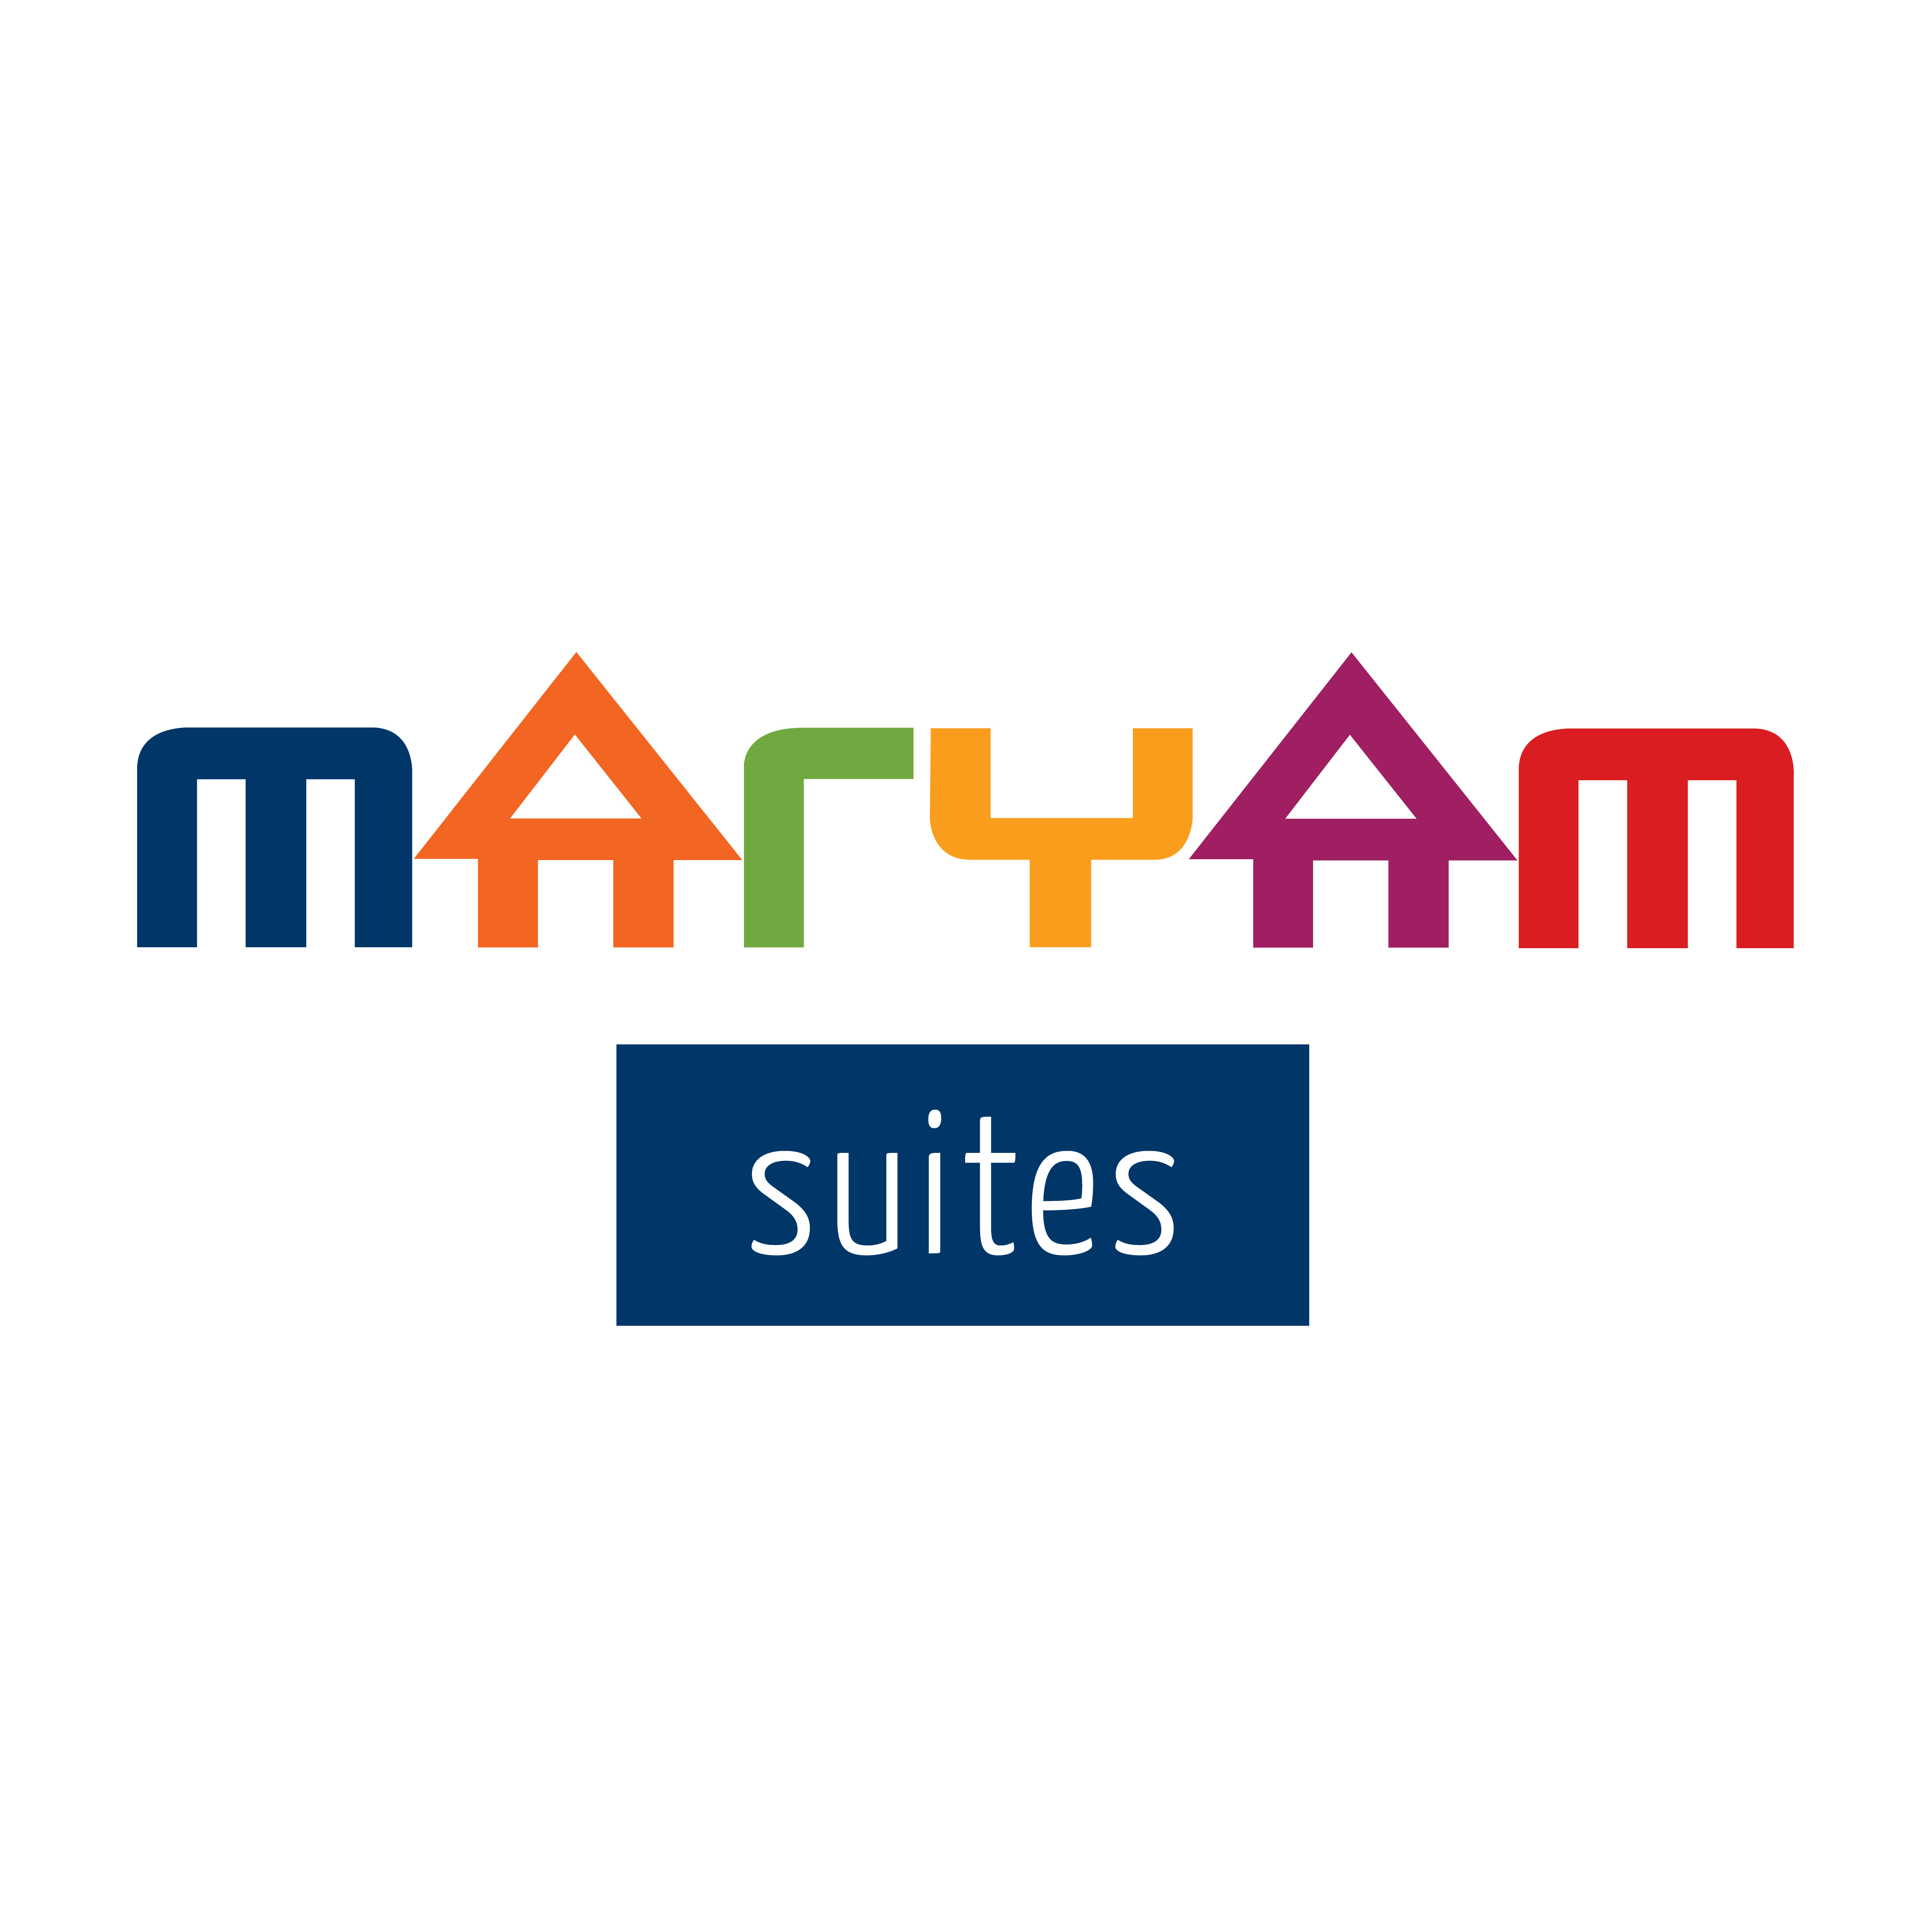 Mary-am Suites: Provider of premier executive furnished apartments in Toronto.